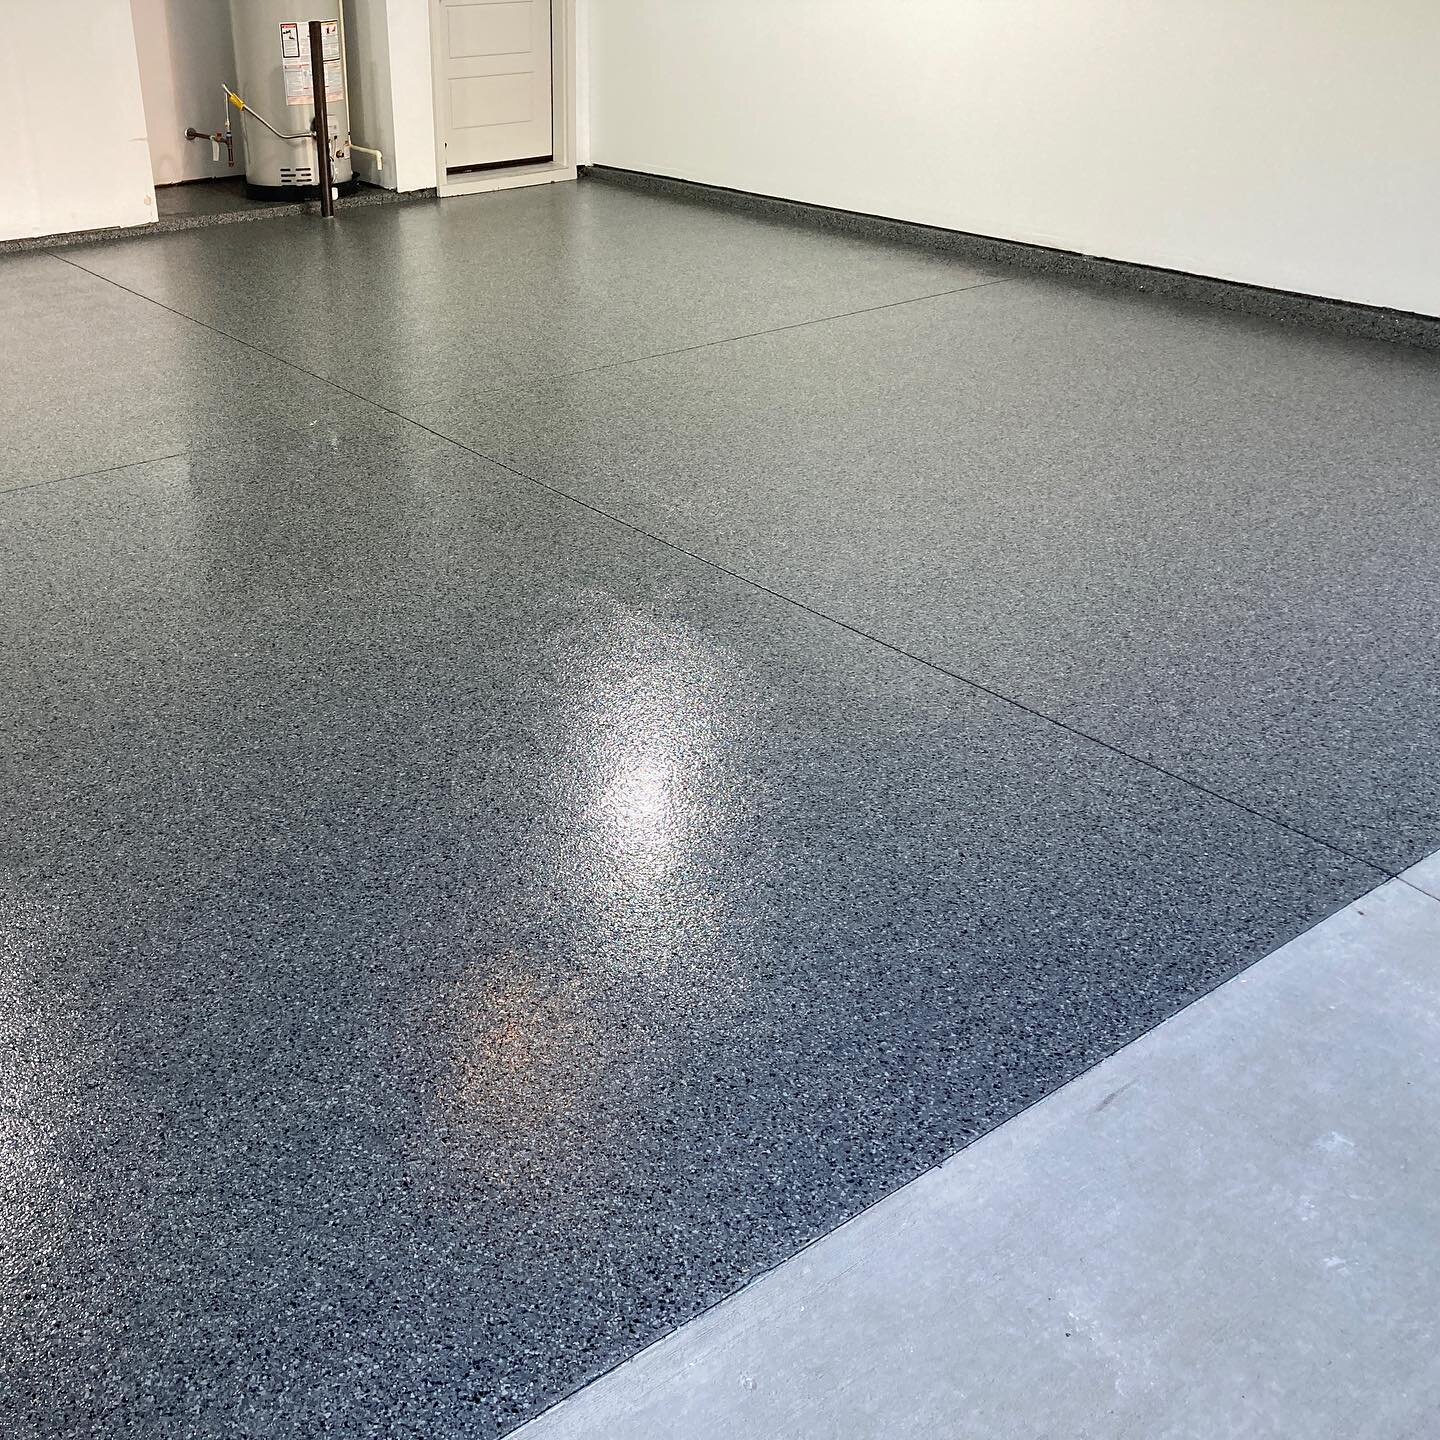 👀But seriously, dark floors are our favorite! The contrast from dark color flakes to the bright white walls is 👌

👉Flake Epoxy System✨
👉Color: Nightfall 🌌
👉Always 💯 

Ready to cover your boring cement with a durable, fresh epoxy coating?

📱ca